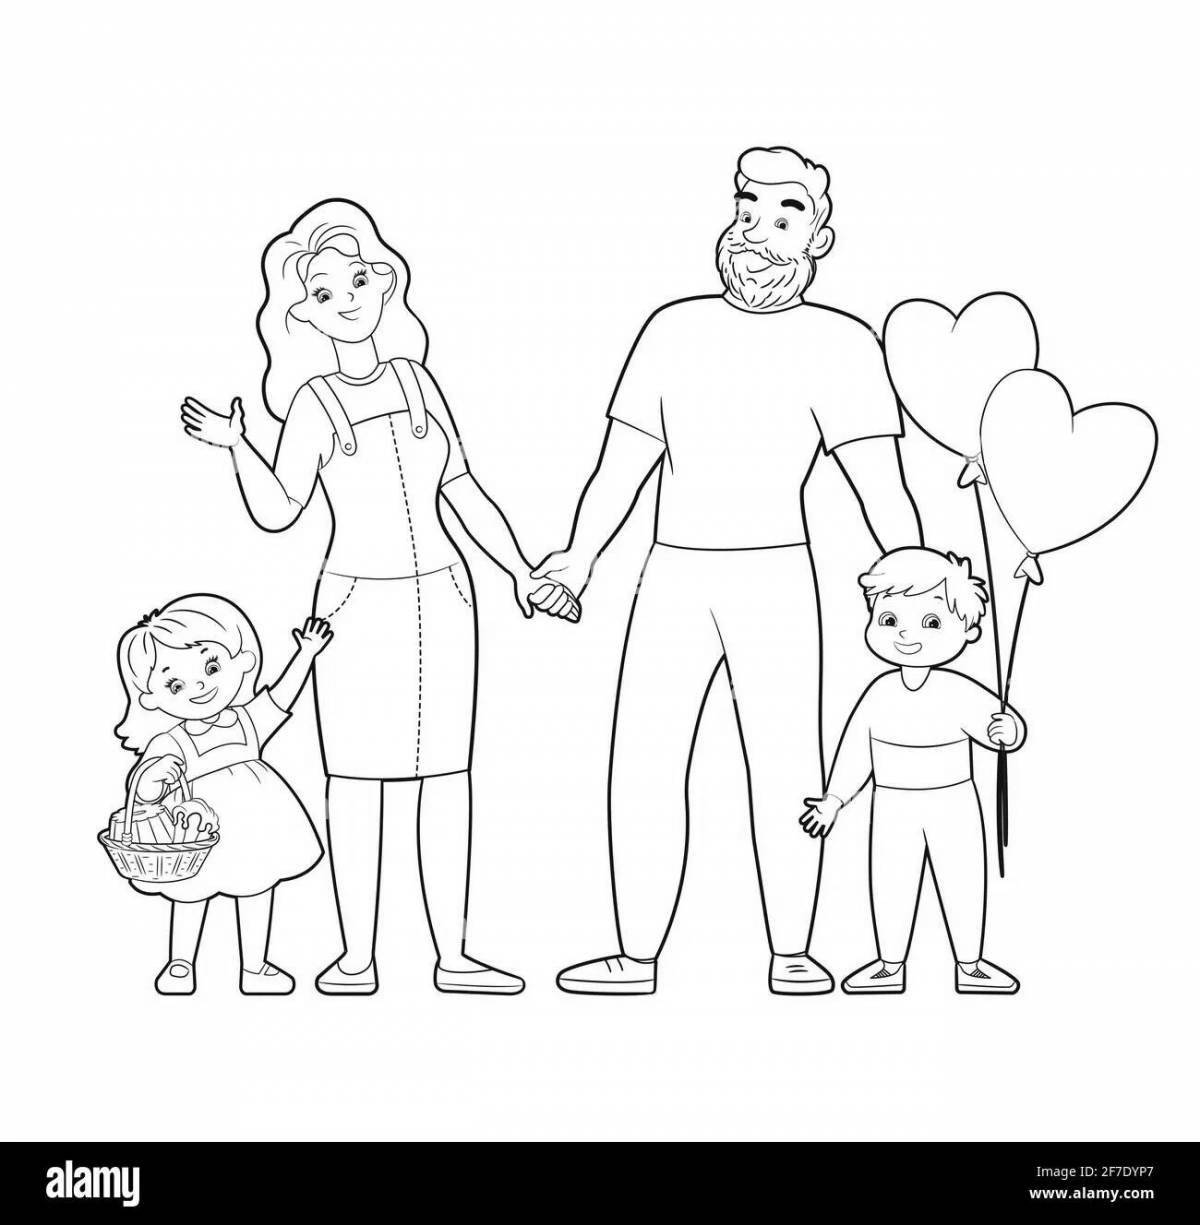 Playful coloring game dad and daughter